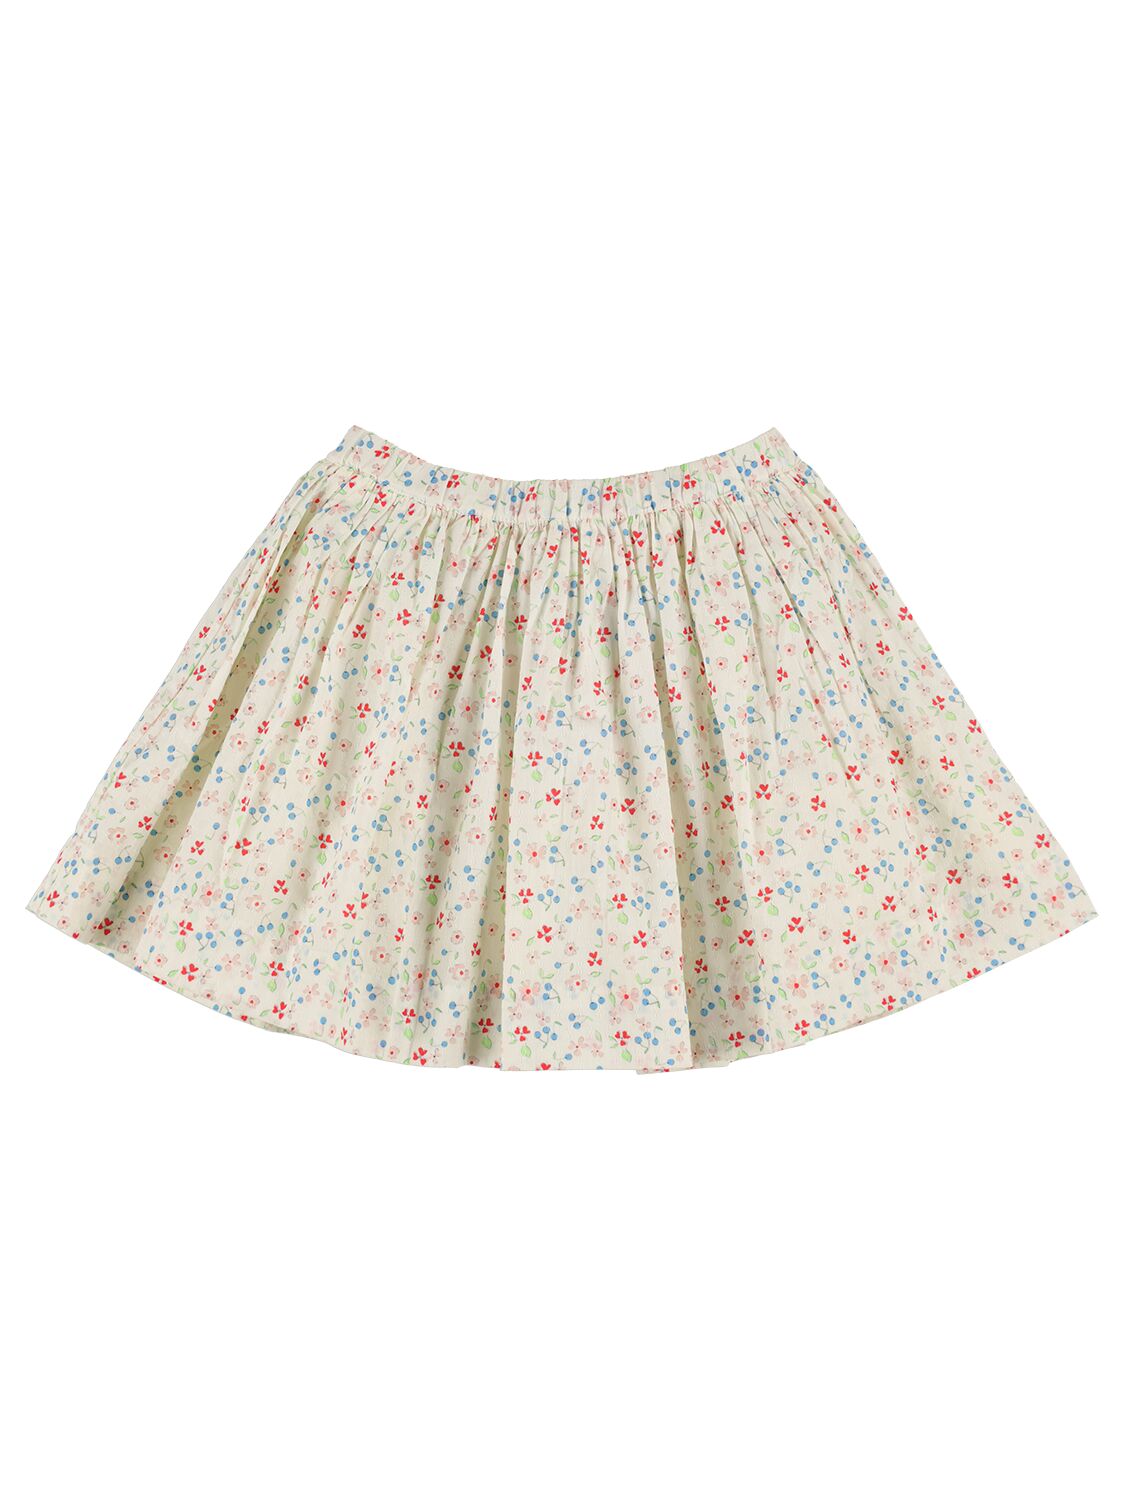 Bonpoint Kids' Printed Cotton Skirt In Multicolor